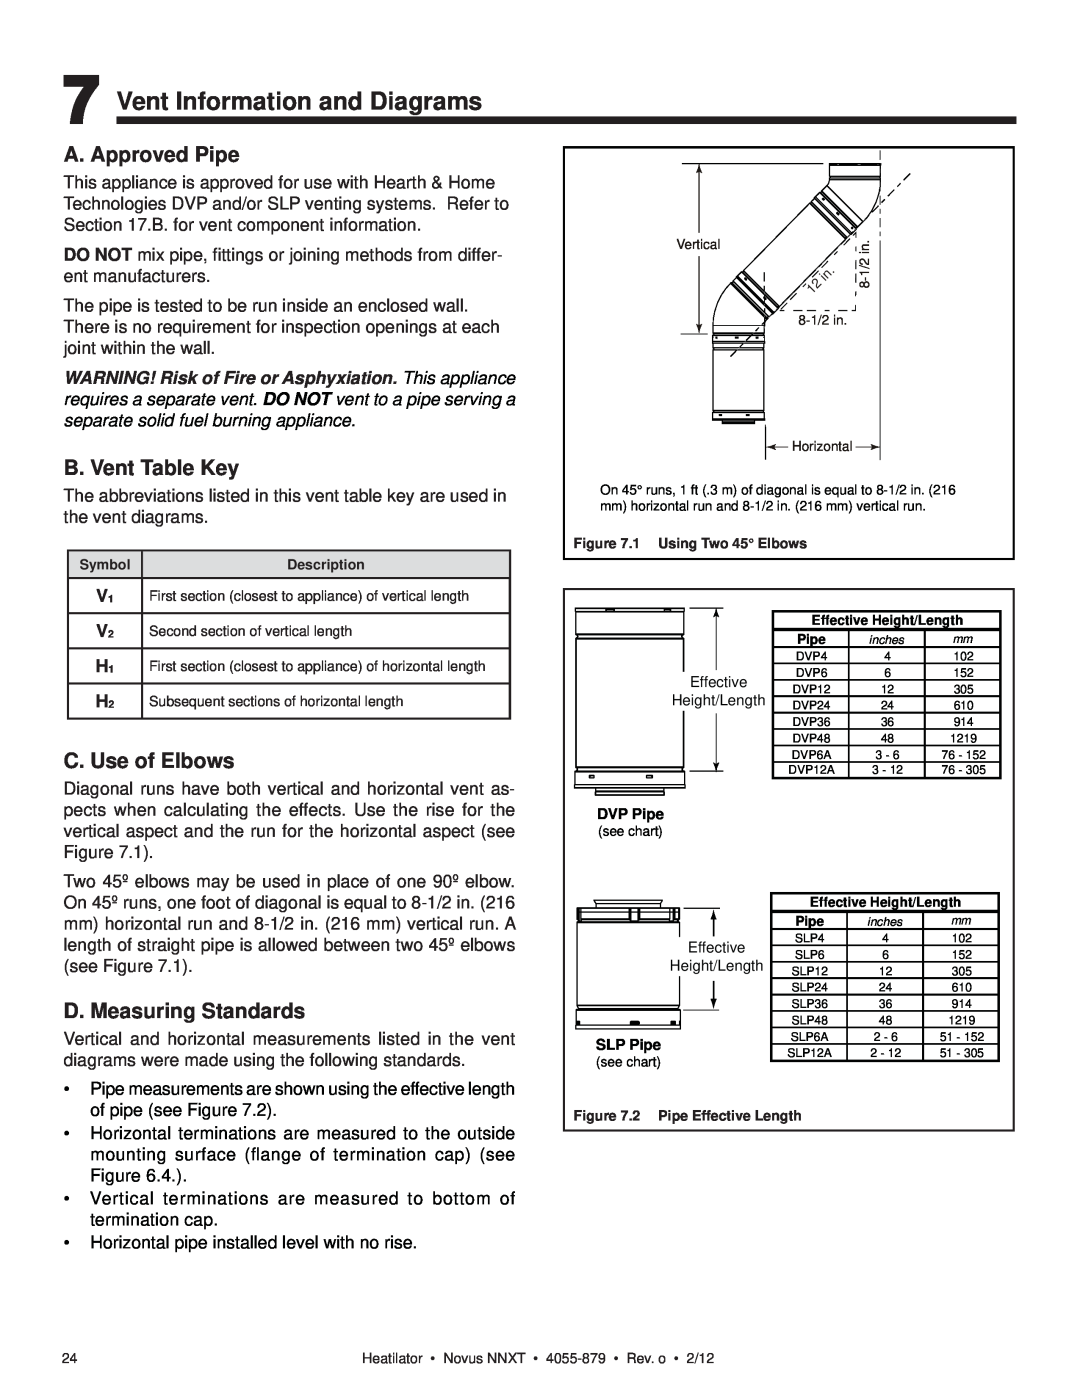 Heatiator NNXT3933IL, NNXT4236I Vent Information and Diagrams, A. Approved Pipe, B. Vent Table Key, C. Use of Elbows 